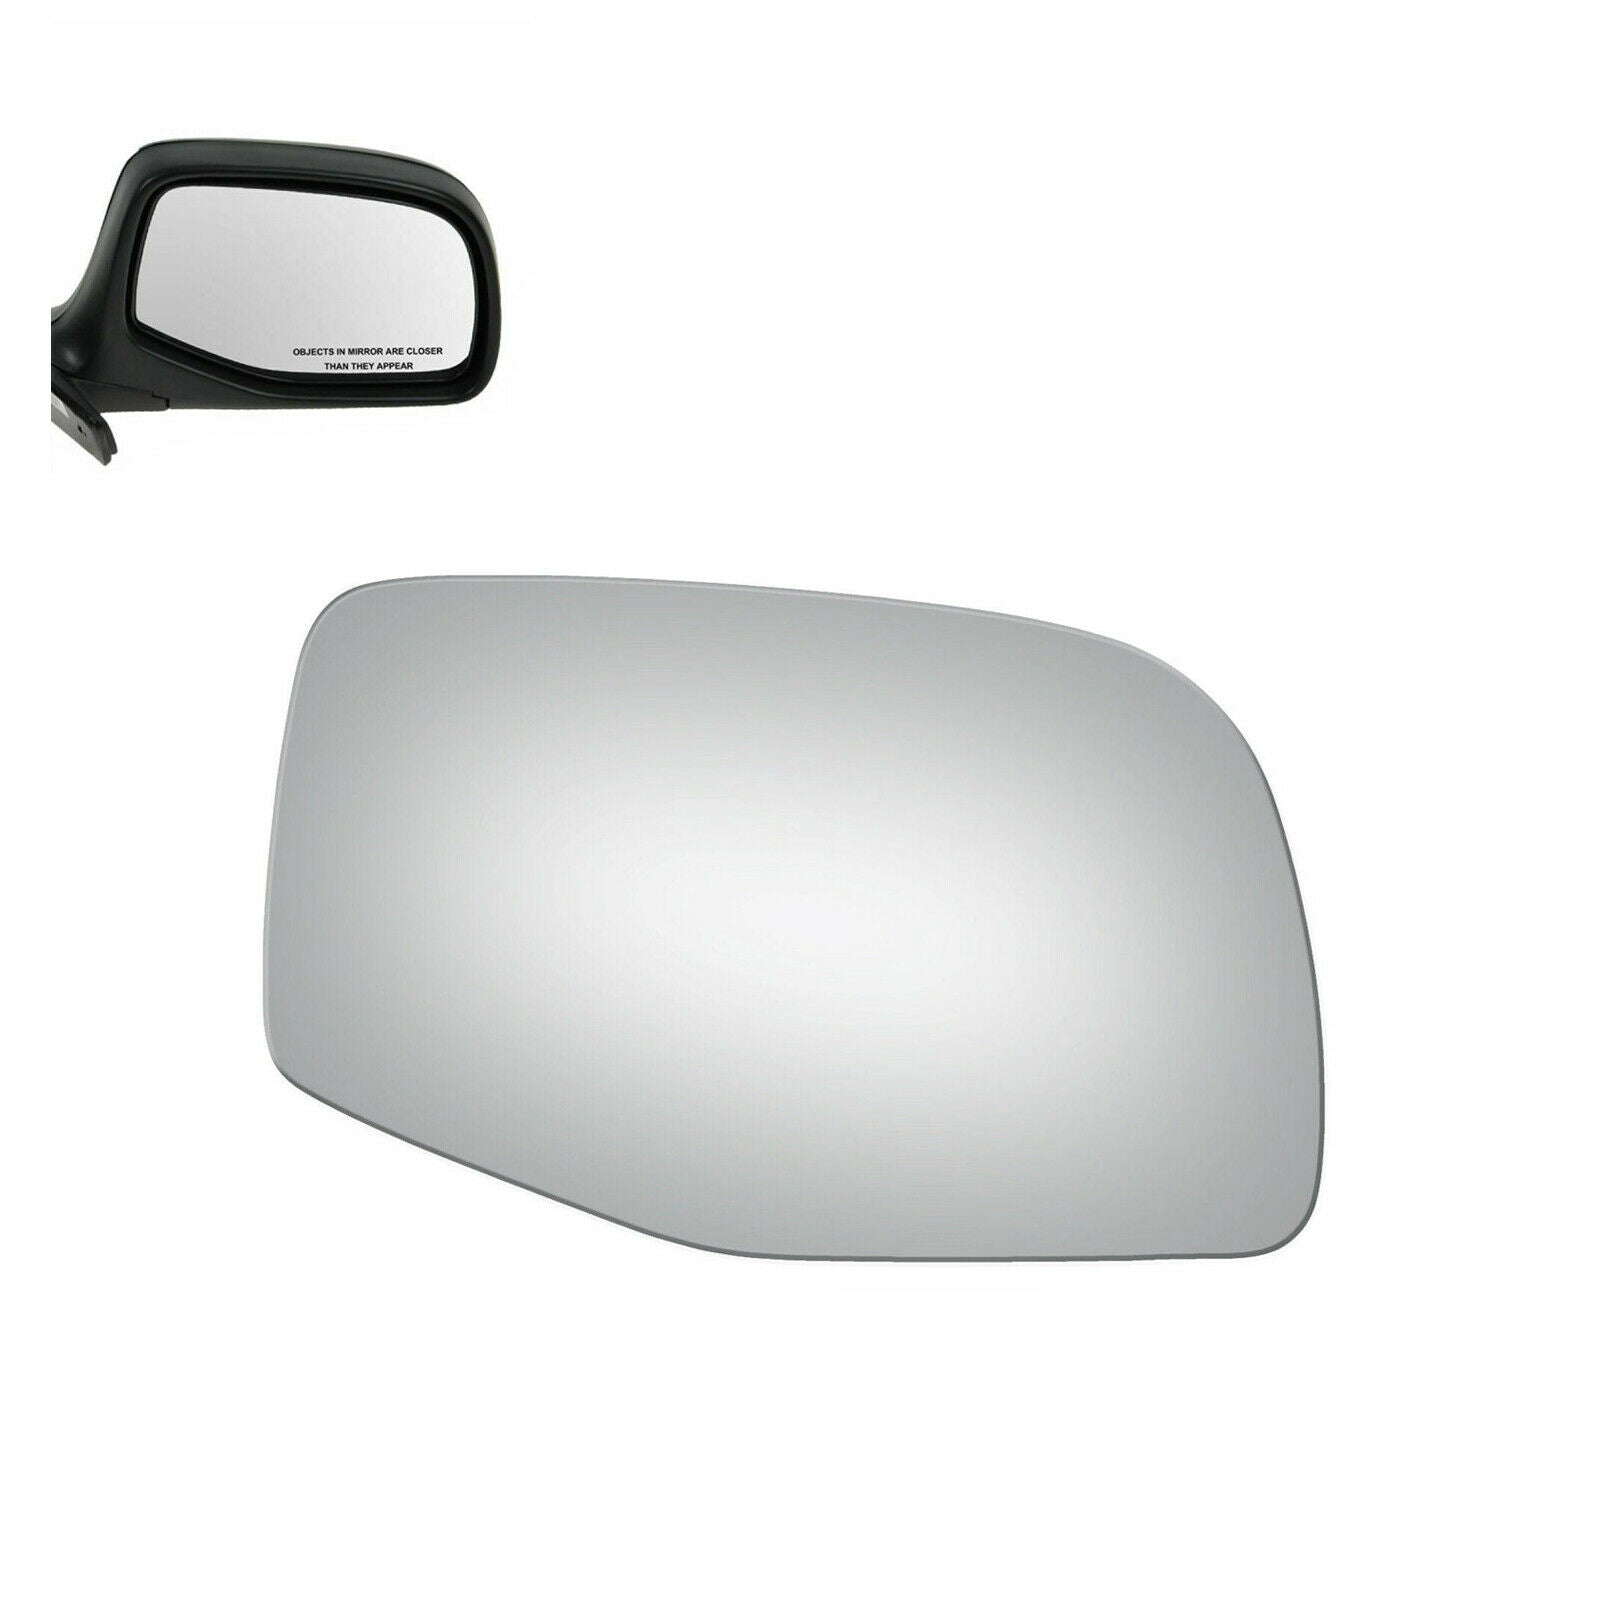 WLLW Mirror Glass Replacement for Ford 89-97 Aerostar/92-96 Bronco/92-97 F Super Duty/92-98 F150 F250 F350 F450, Driver Left LH/Passenger Right RH/The Both Sides Flat Convex M-0057